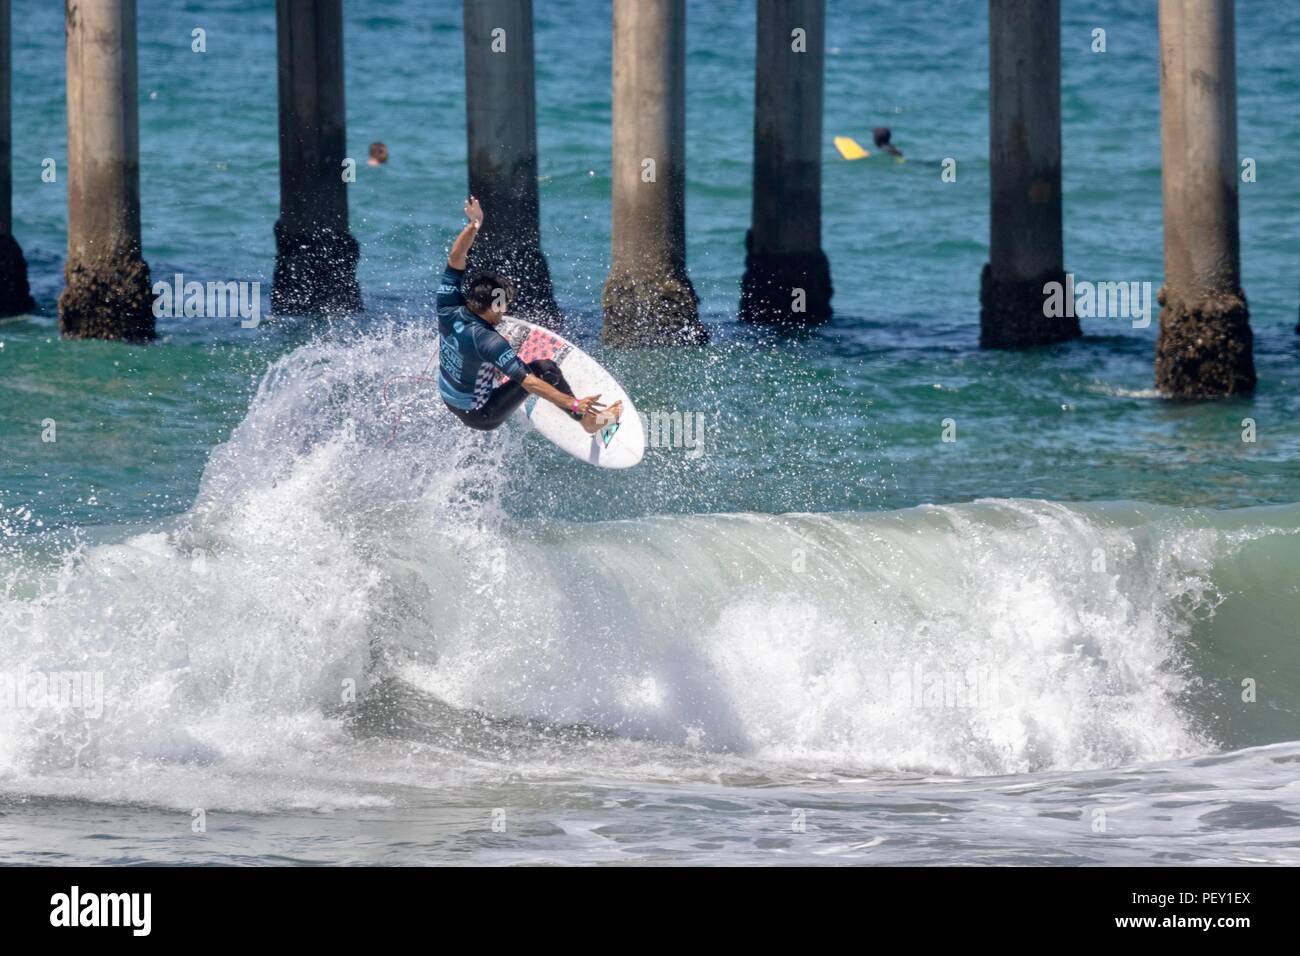 Cam Richards competing in the US Open of Surfing 2018 Stock Photo